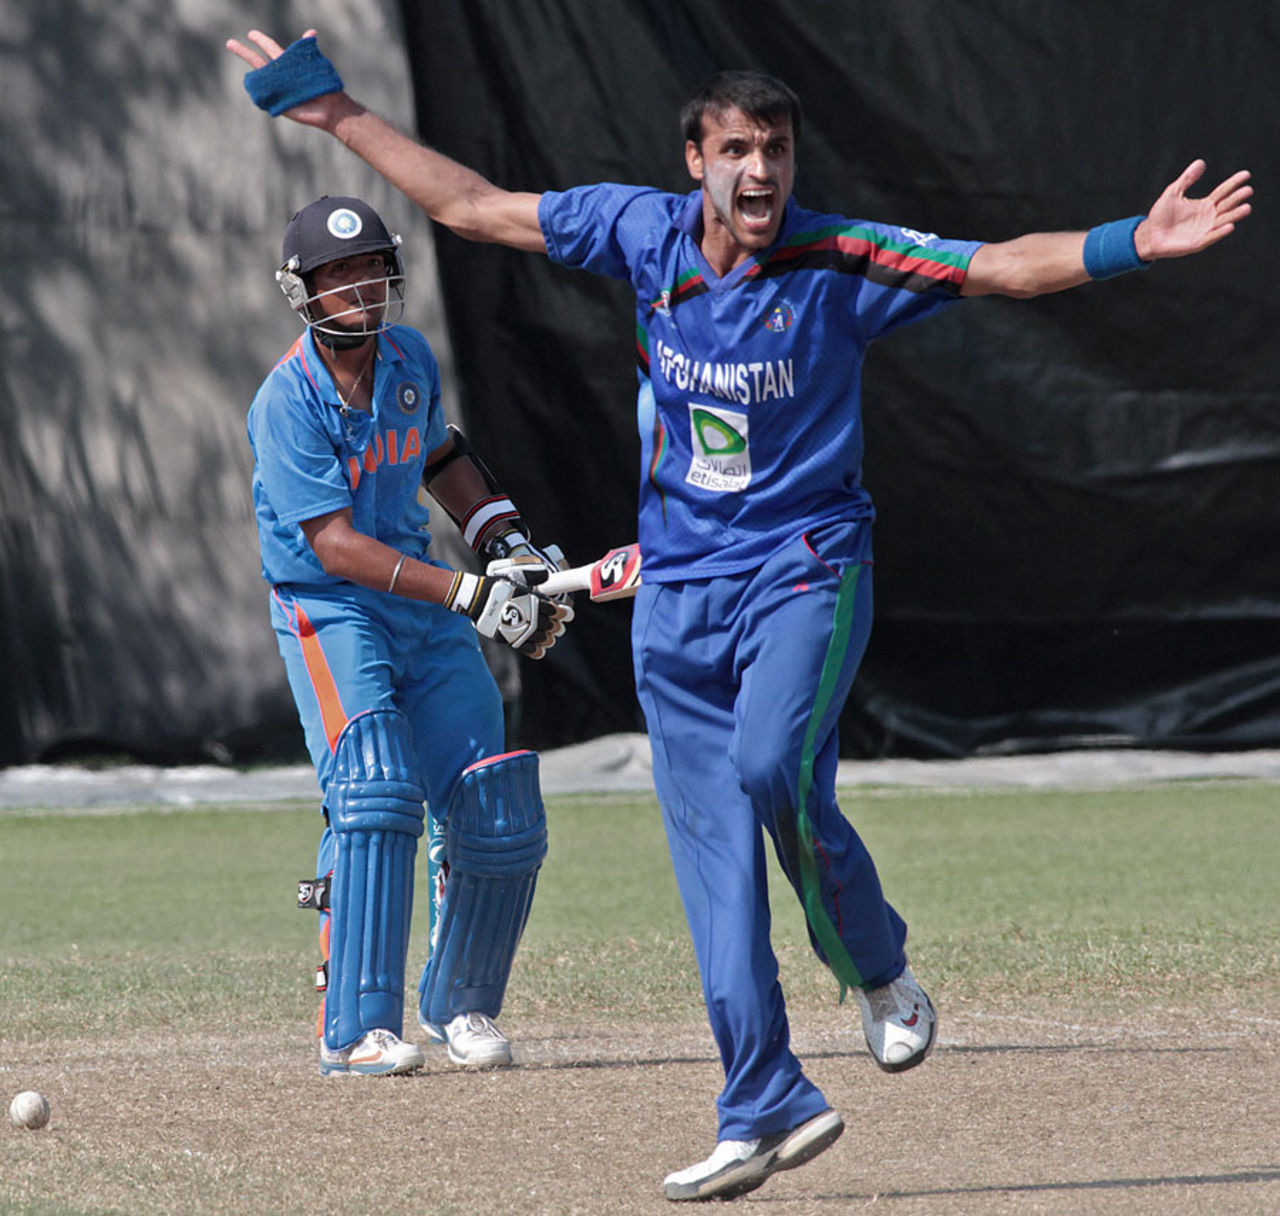 Izatullah Dawlatzai appeals for the wicket of Sandeep Sharma, Afghanistan v India Under-23s, Group A, Asian Cricket Council Emerging Teams Cup, Singapore, August 22, 2013